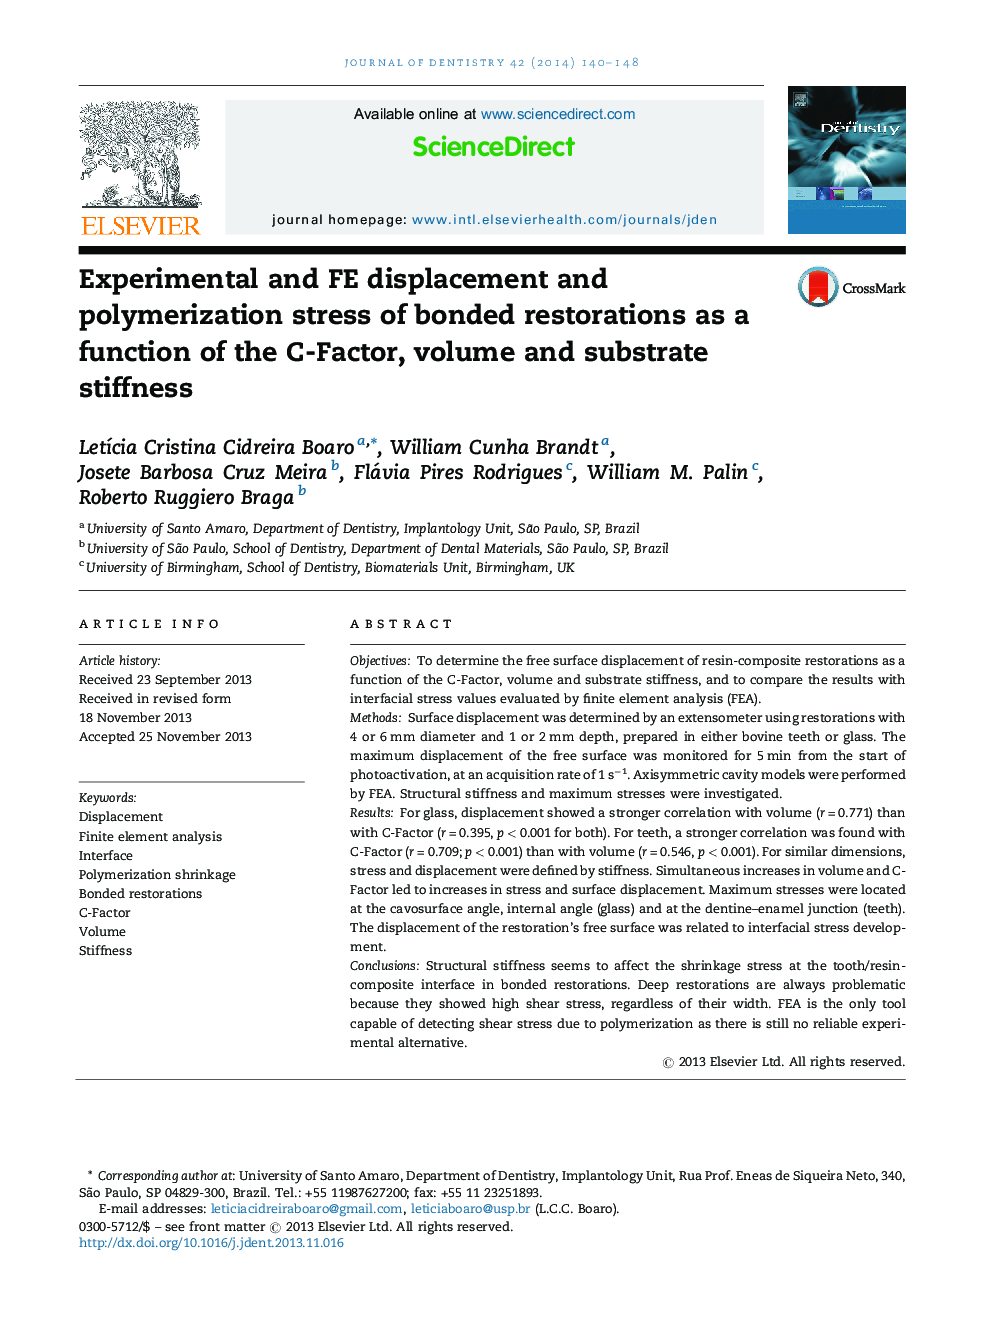 Experimental and FE displacement and polymerization stress of bonded restorations as a function of the C-Factor, volume and substrate stiffness